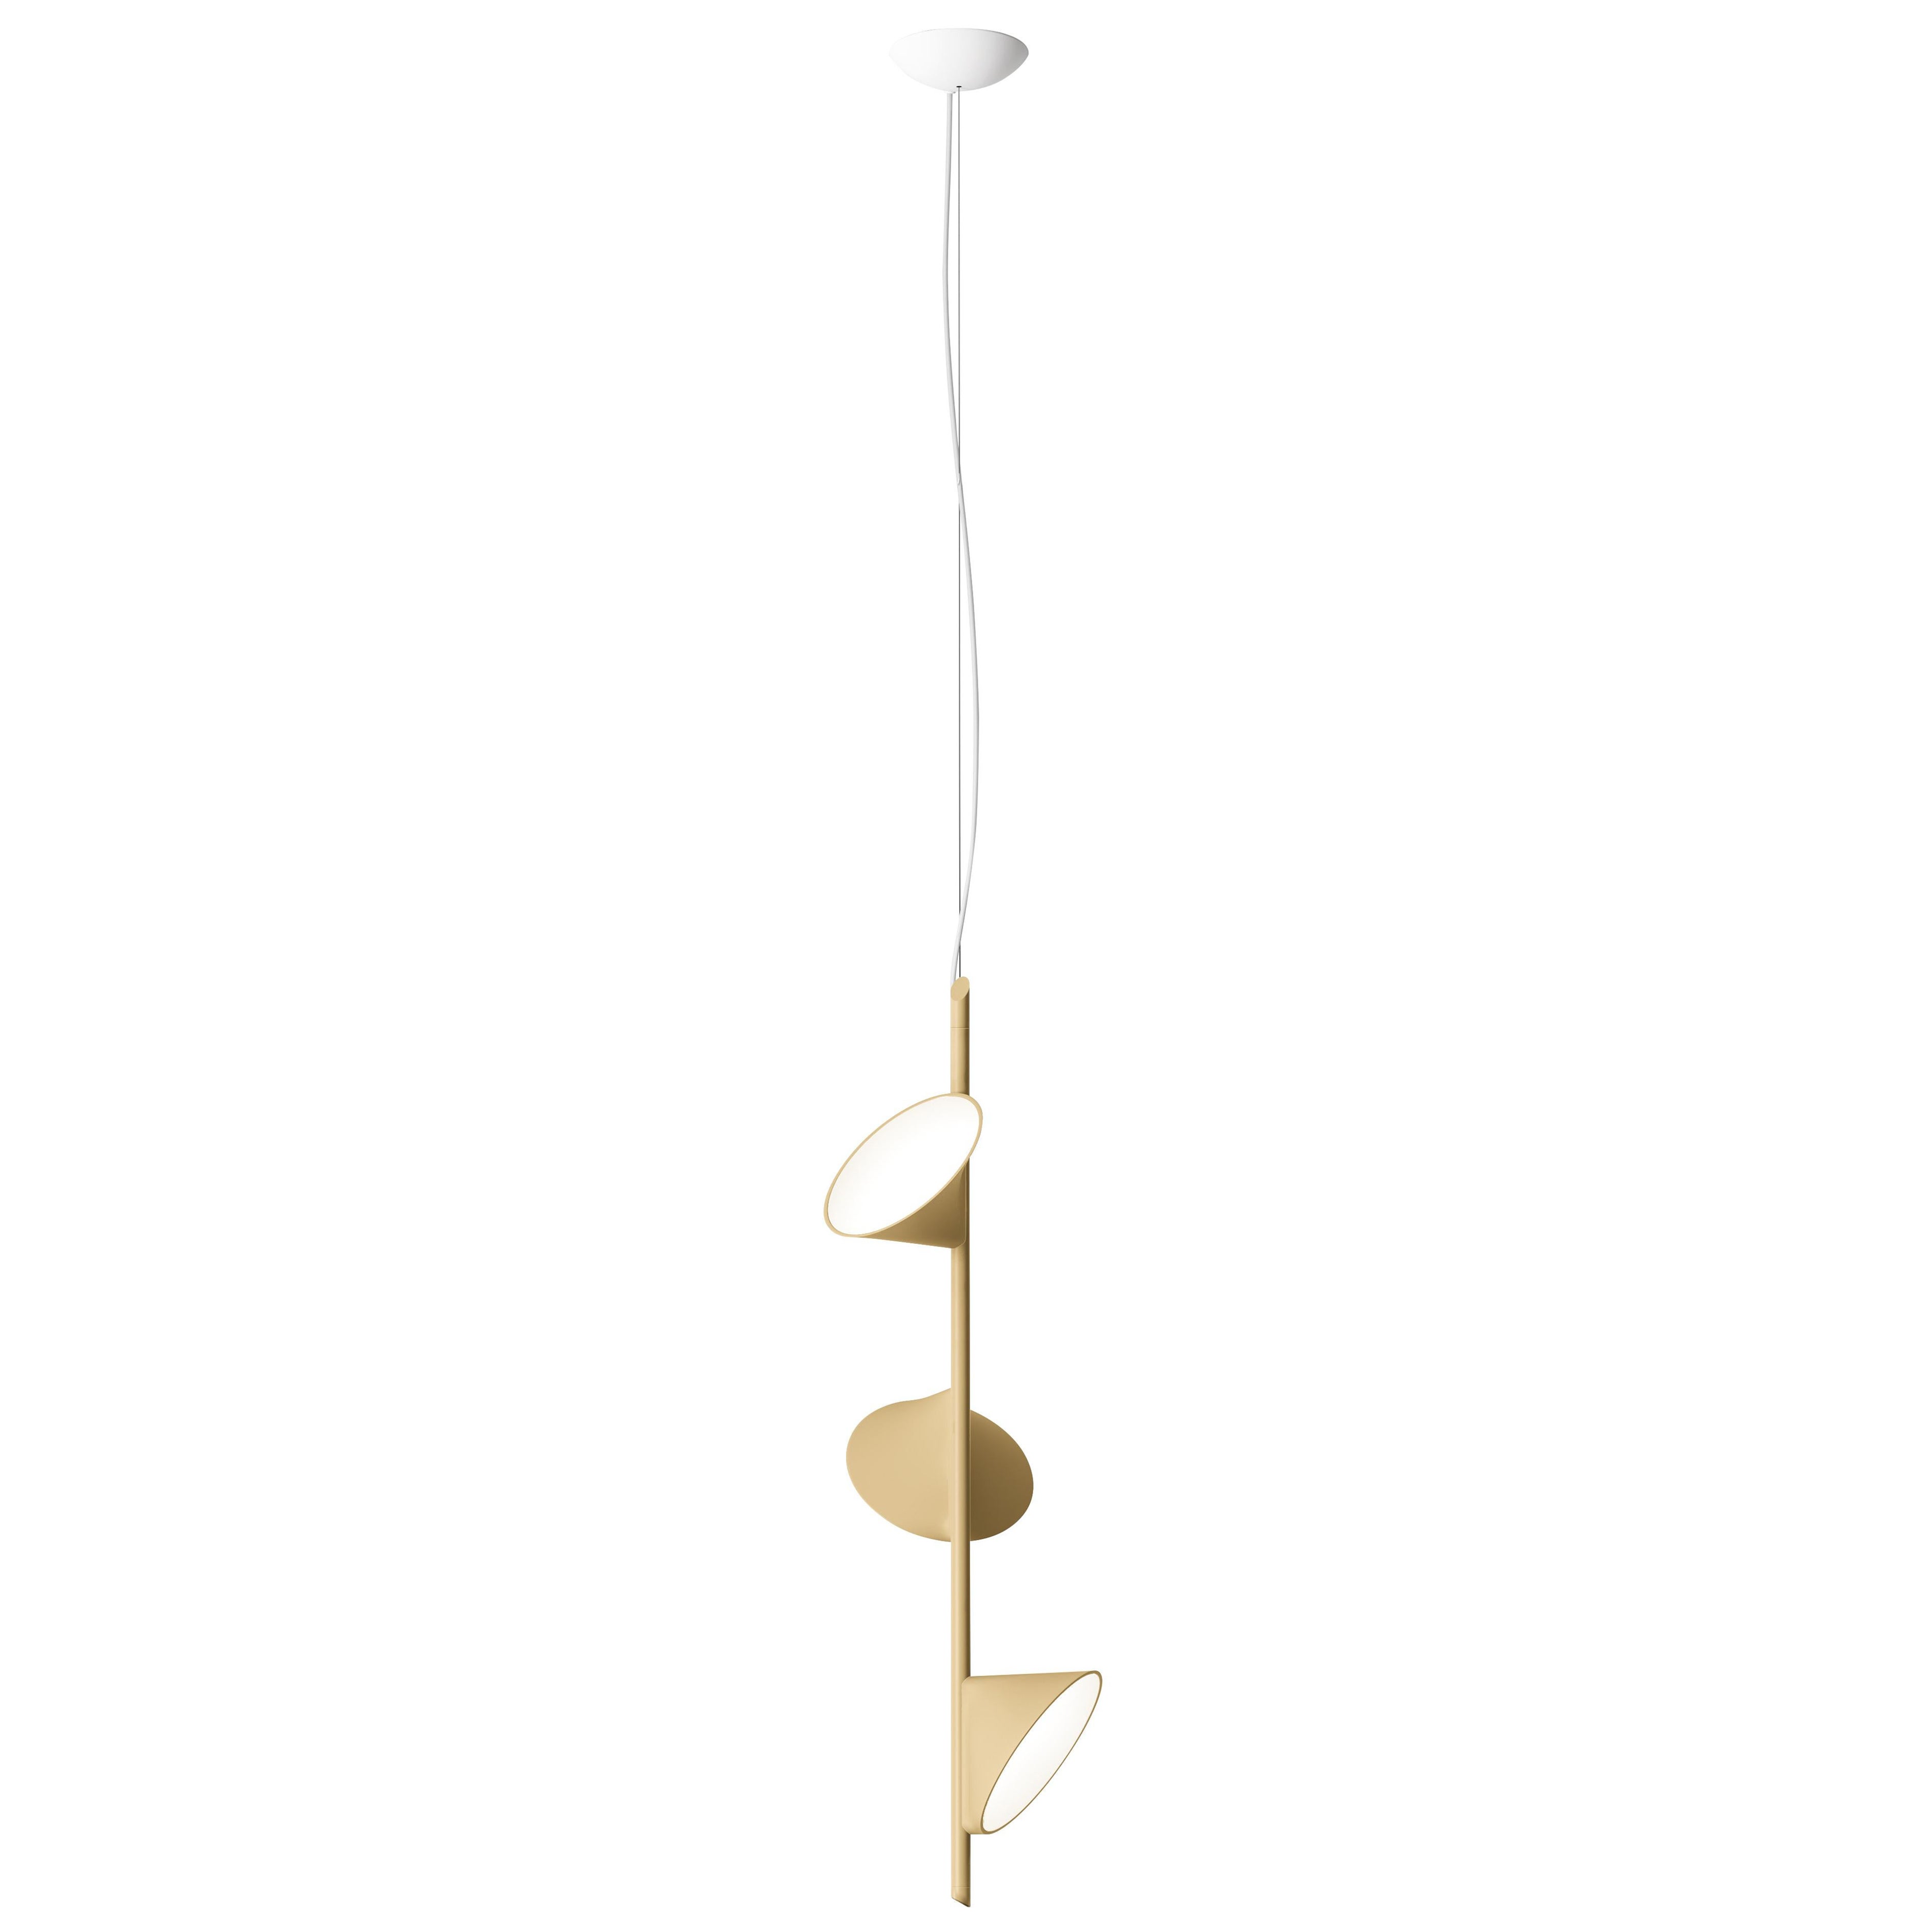 Axolight Orchid 3 Light Pendant Lamp with Aluminum Body in Sand by Rainer Mutsch For Sale